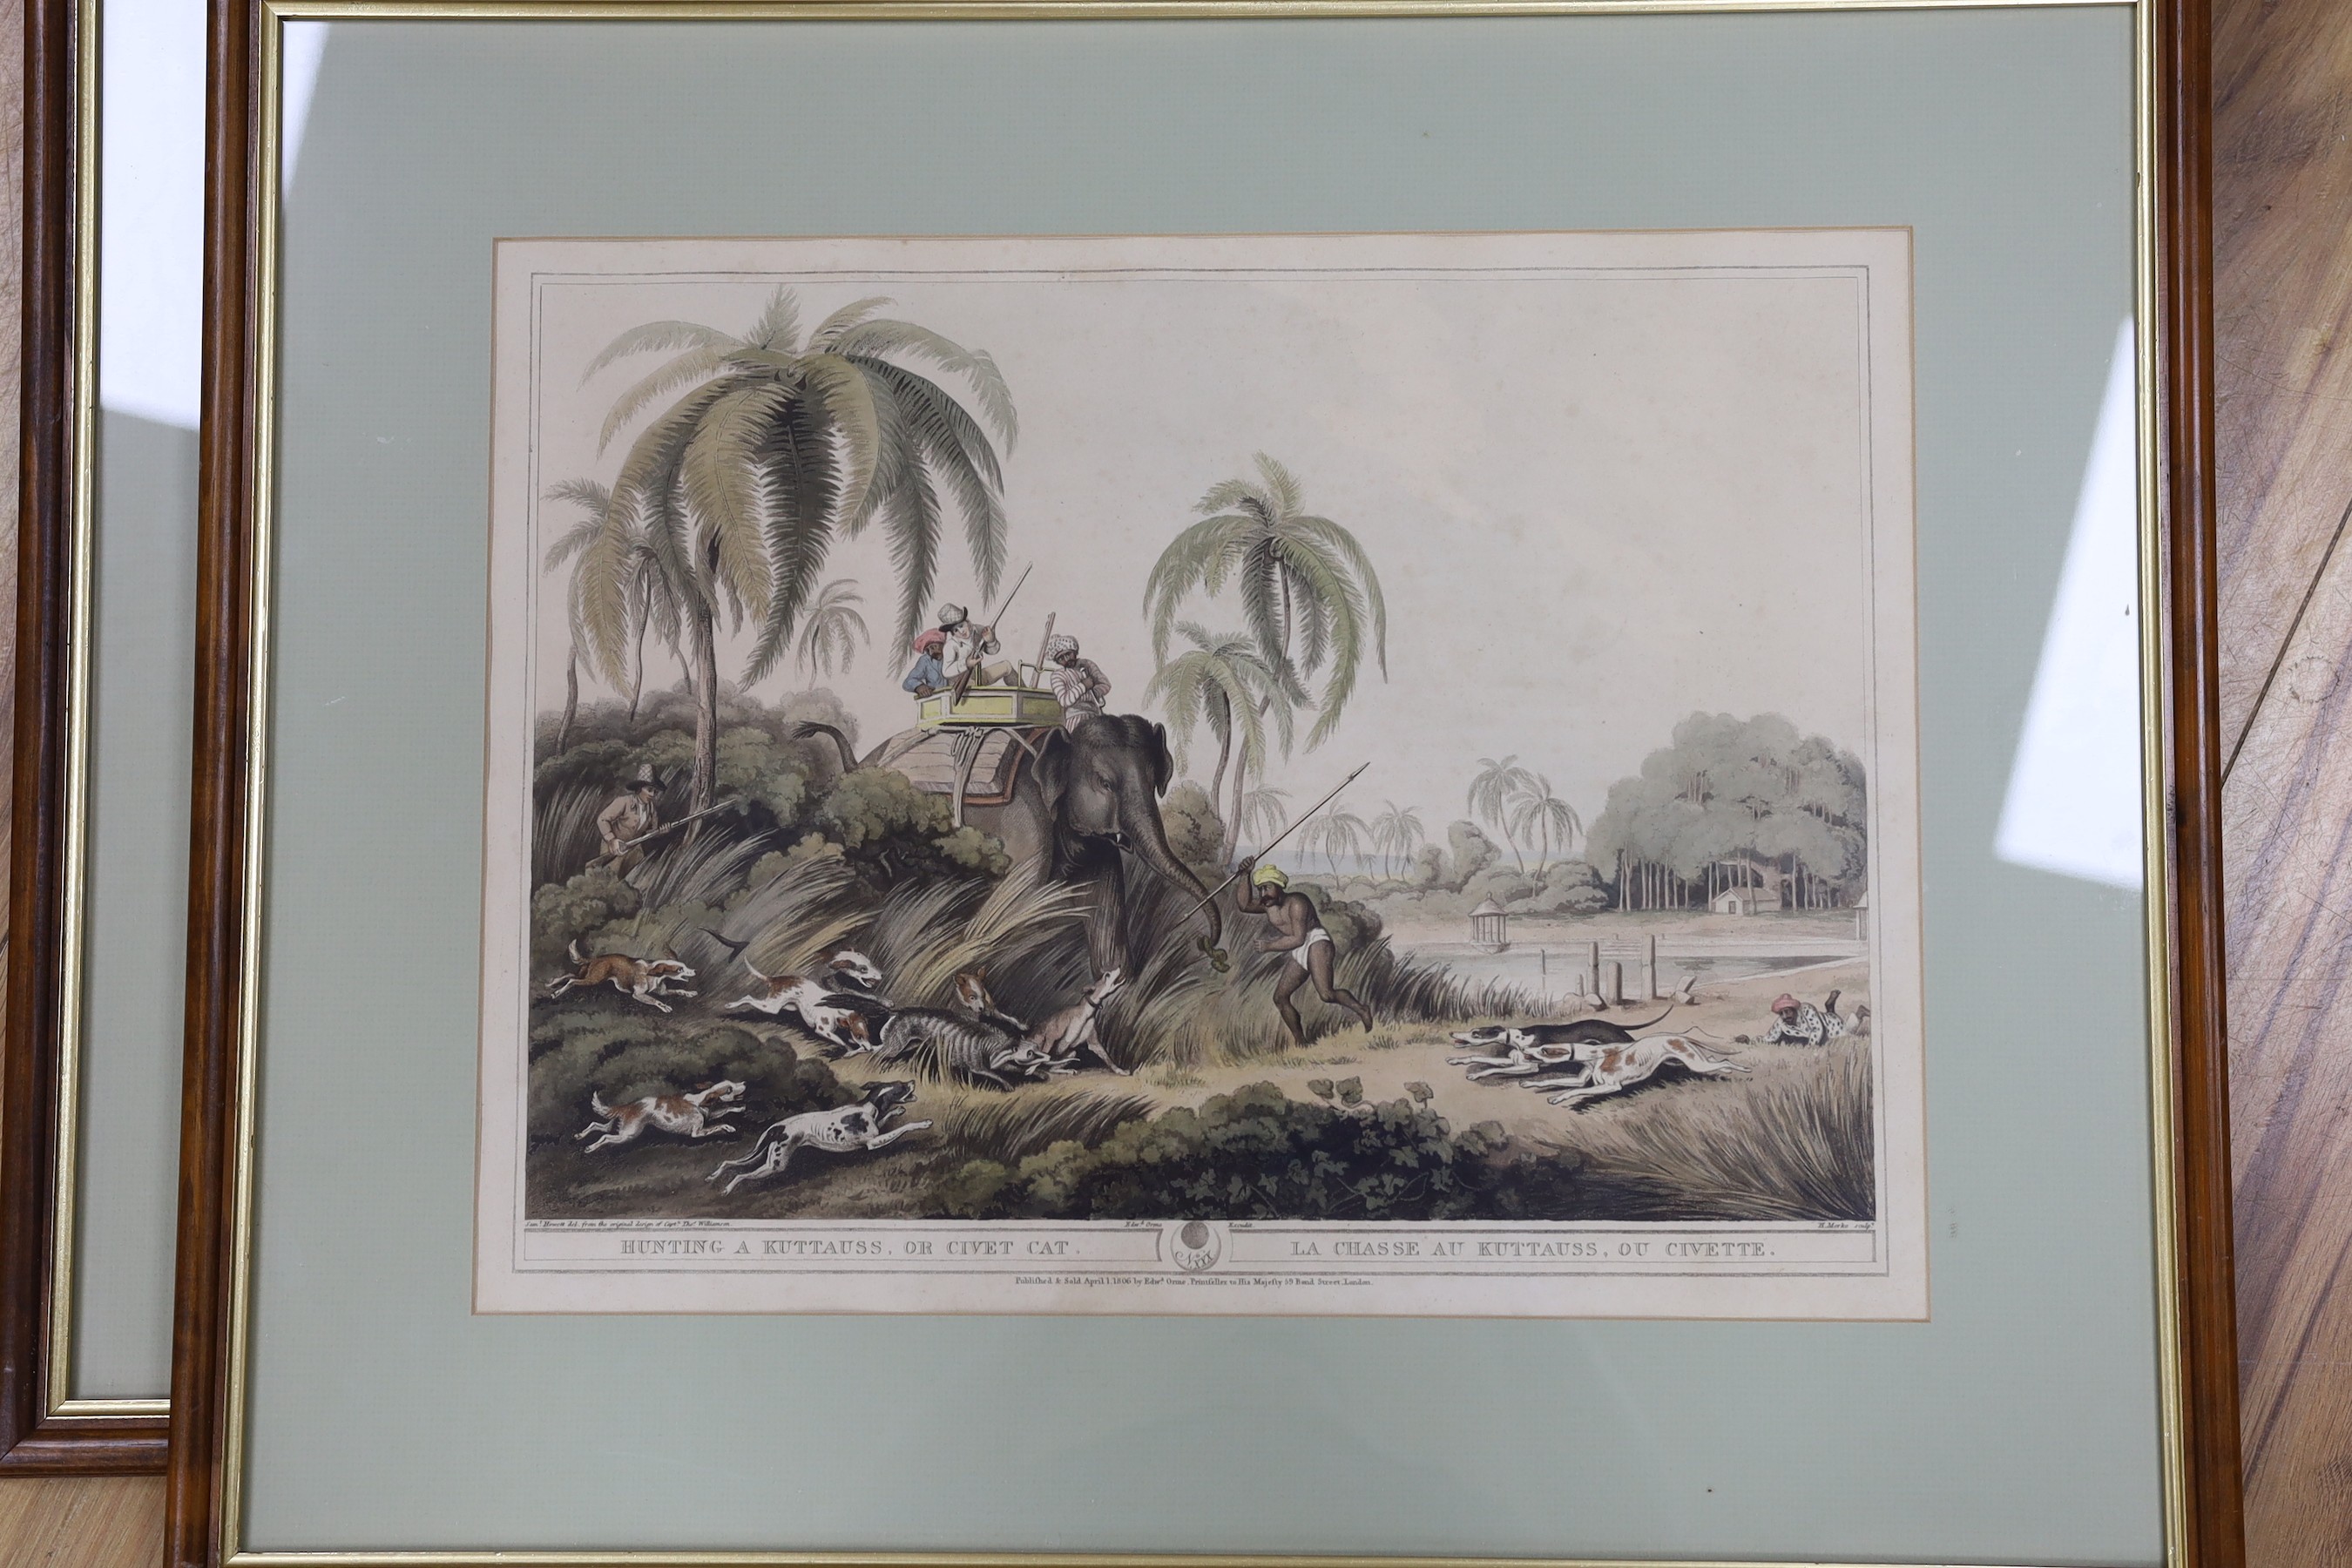 Edward Orme Publ. 1805, four colour prints from Oriental Field Sports, 'The Tiger at Bay', 'The Hog Deer at Bay', 'Hunting a Kuttauss or Civit Cat' and 'Driving elephants into a keddah', overall 36 x 47cm